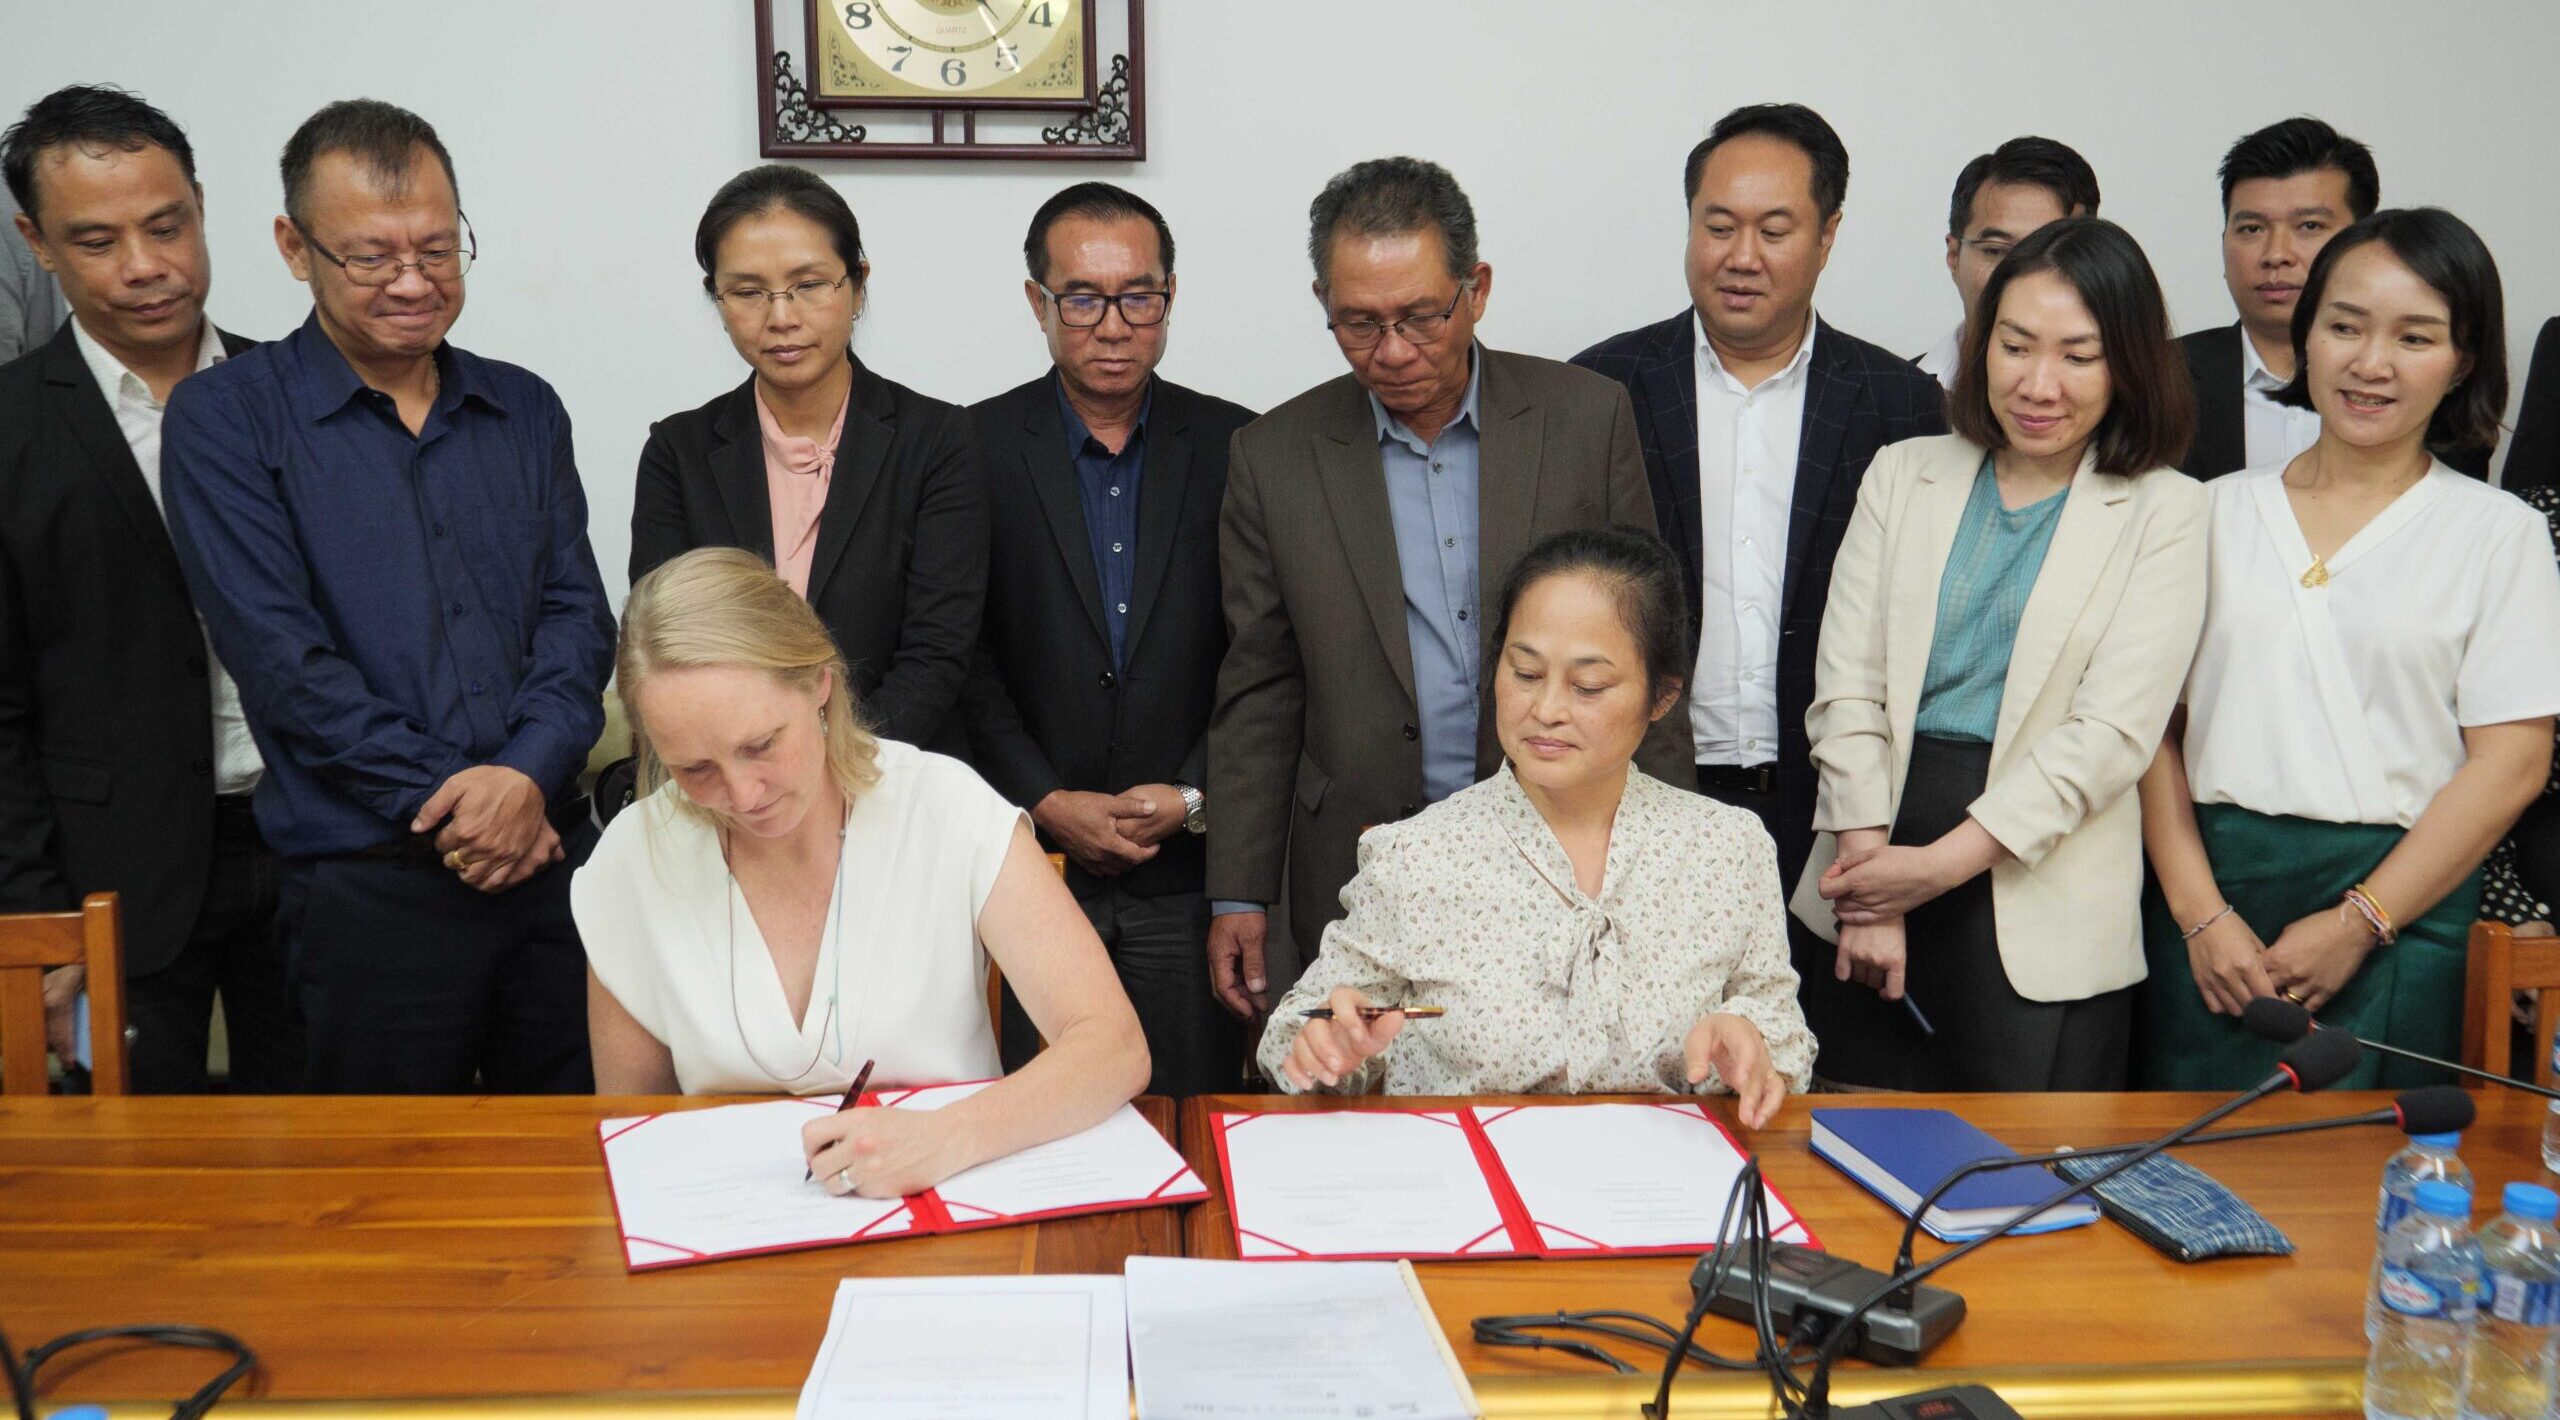 Signing of MOA between LEI and DIC, IPD, MPI for the Transformative Land Investment Project